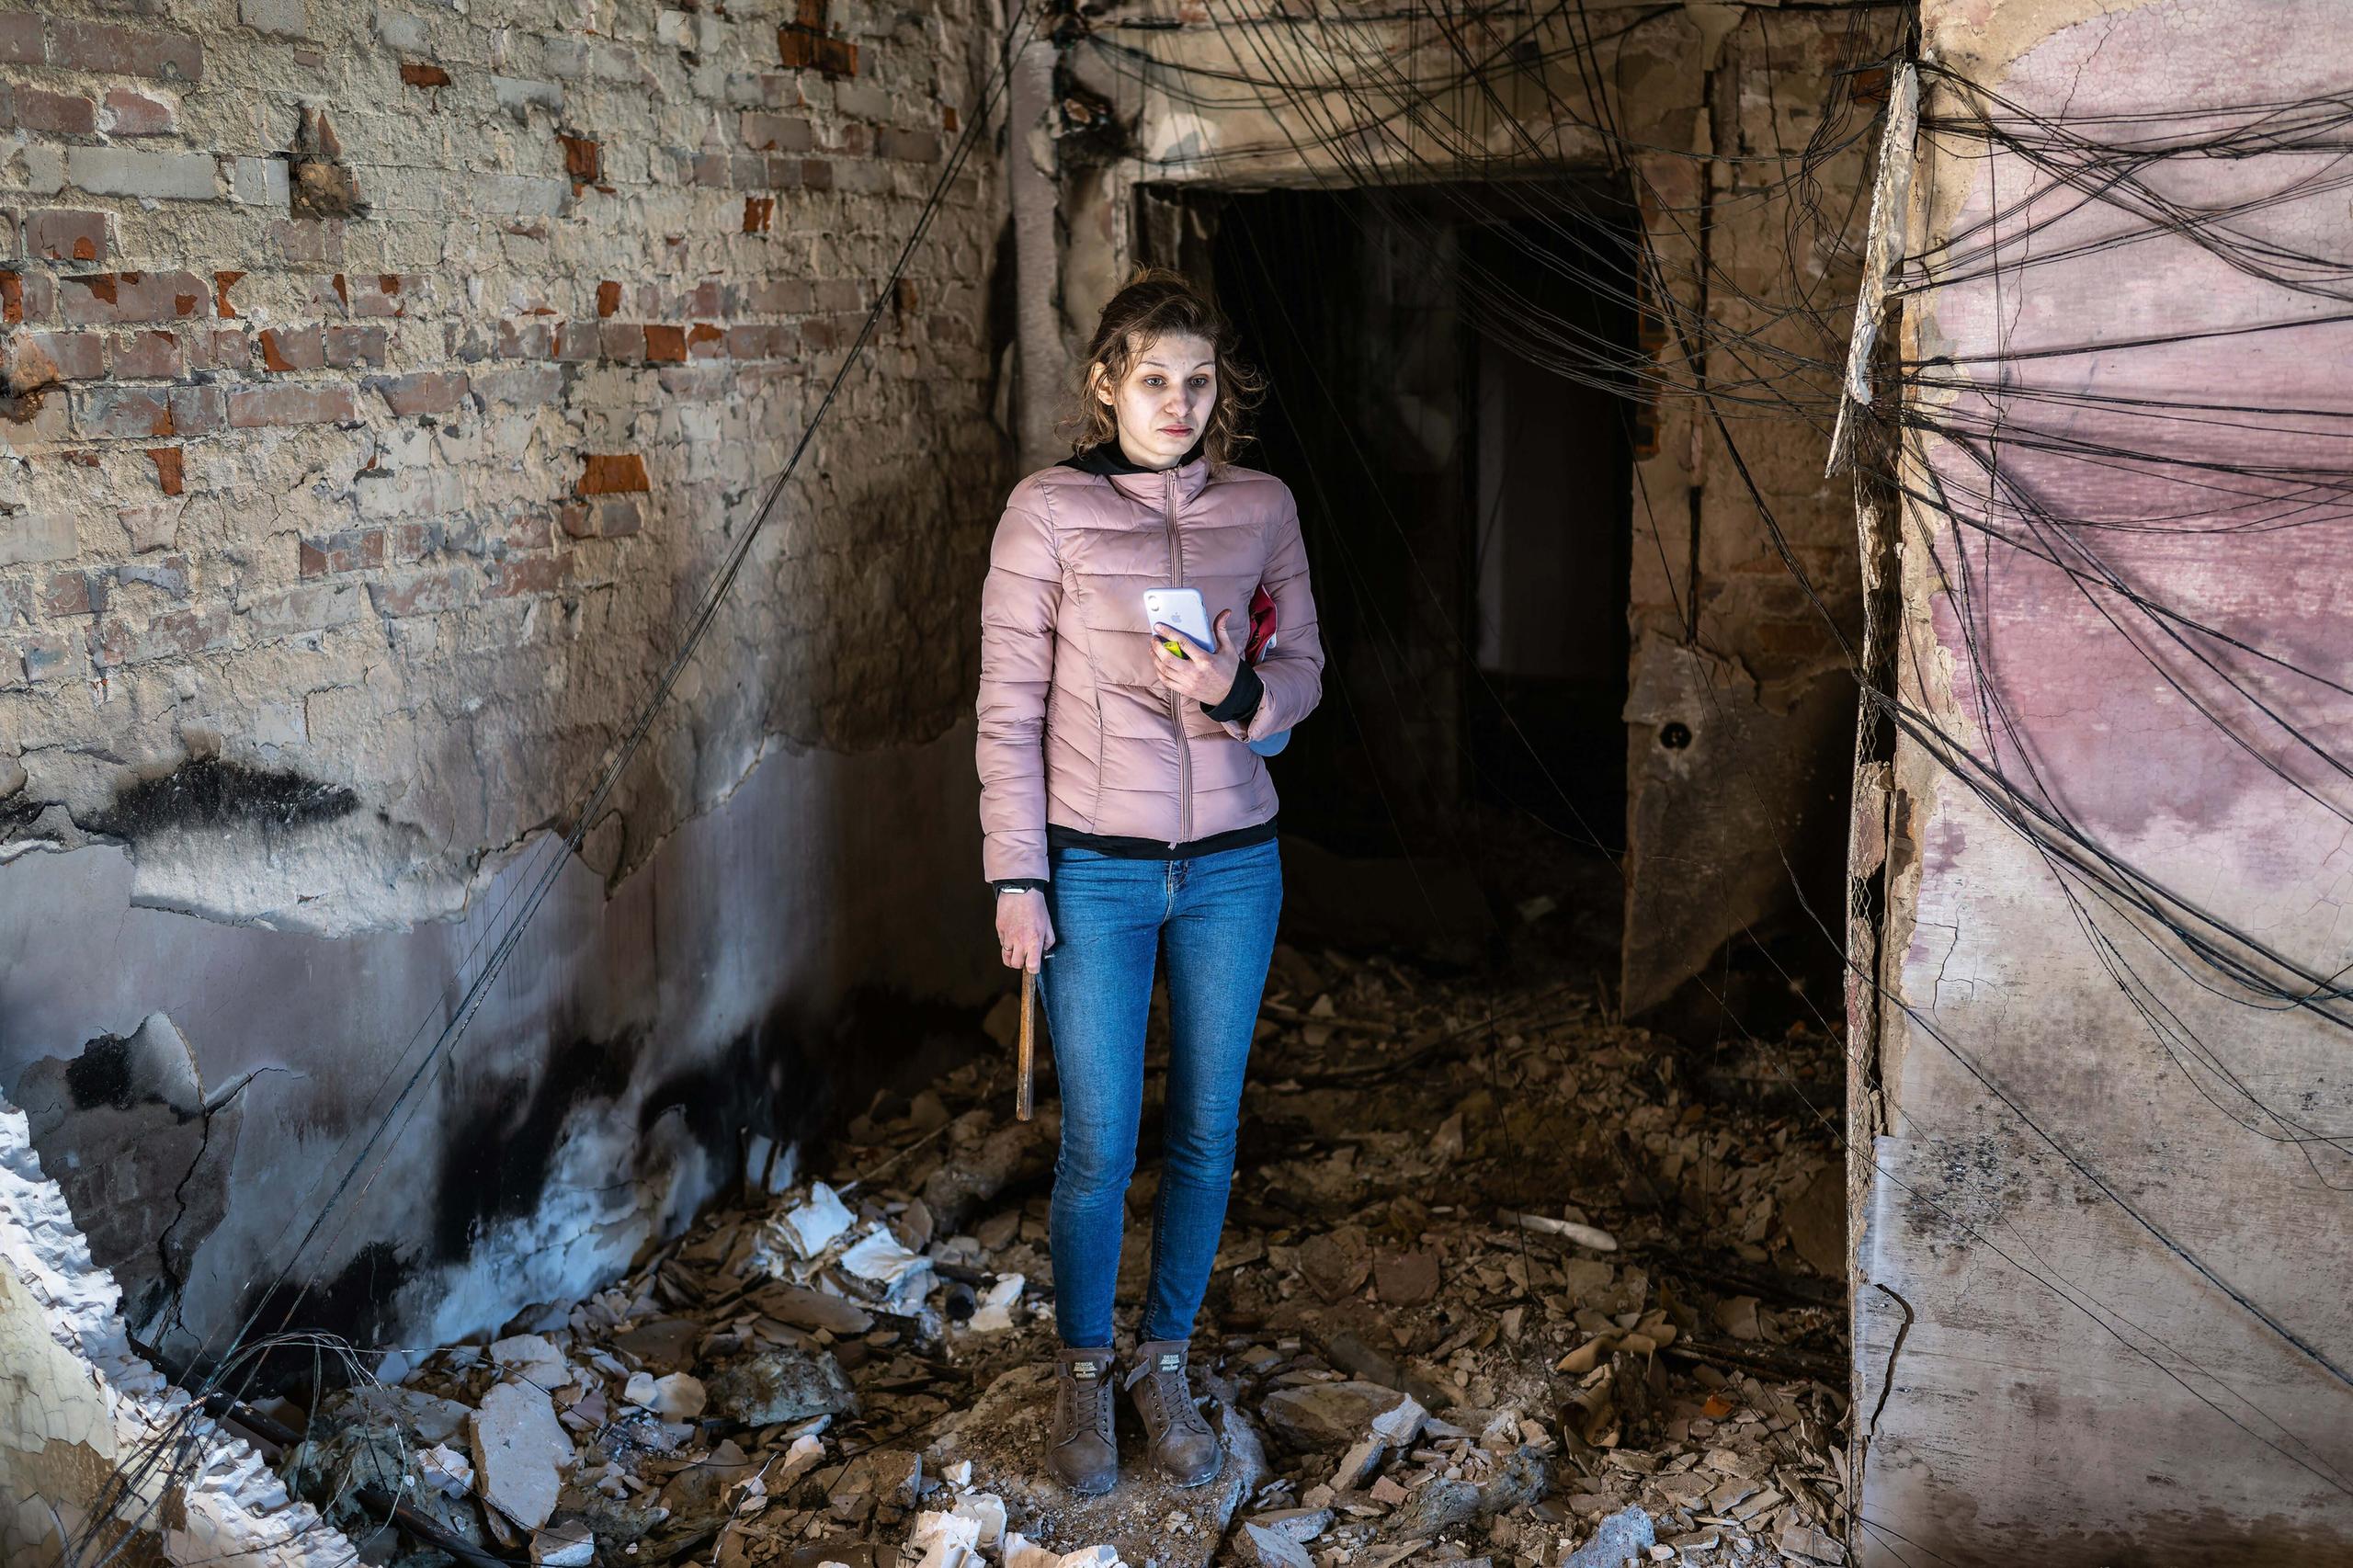 A person wearing a pink Jacket stands within the rubble of a destroyed building in Ukraine